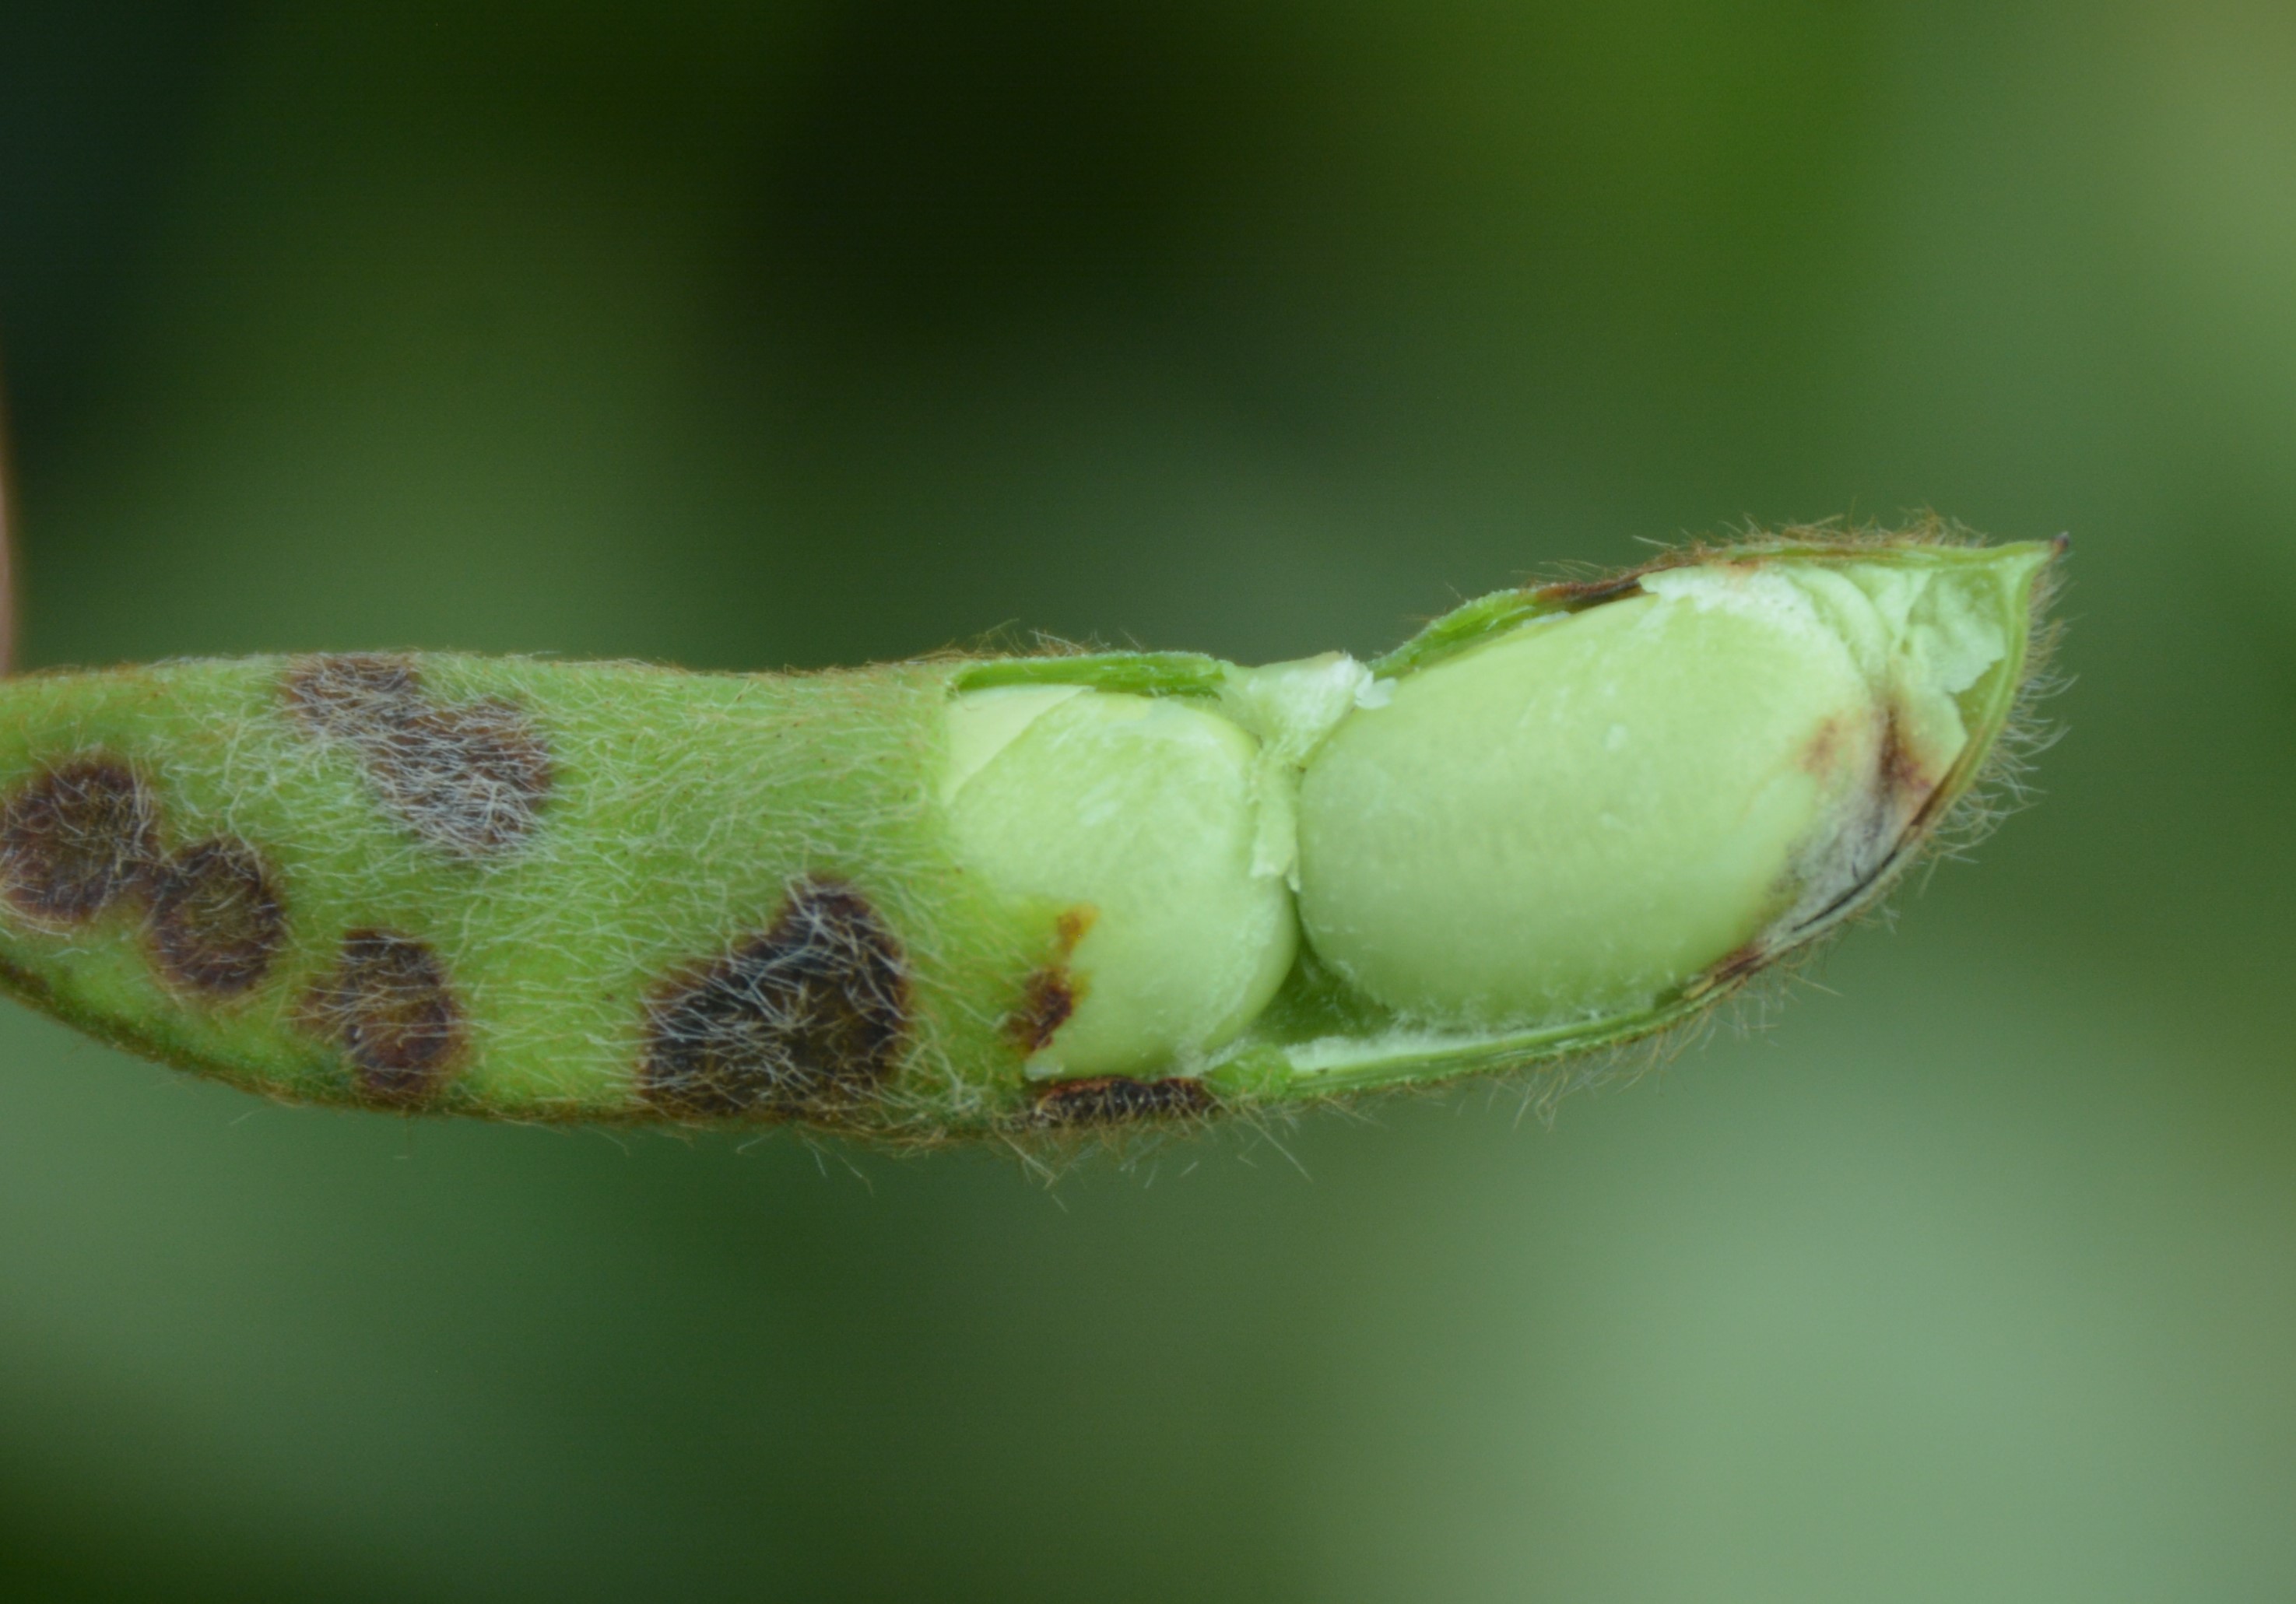 A green soybean pod with frogeye leaf spot symptoms. The pod is partially open to reveal developing seed at the end of the pod with frogeye leaf spot symptoms developing.